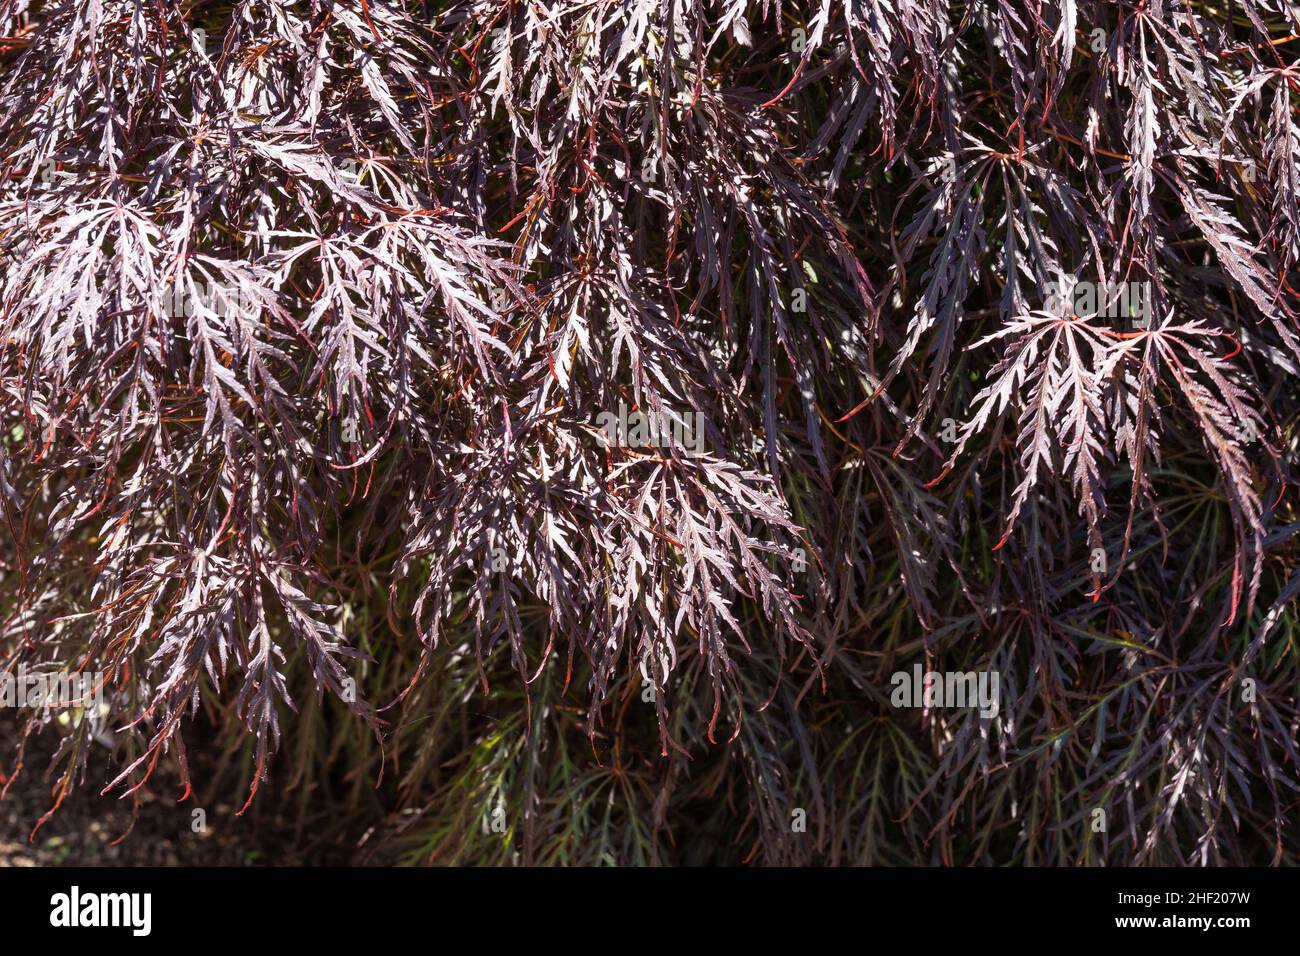 Crimson Queen Japanese Maple (Acer palmatum var. dissectum 'Crimson Queen') is low-branching, dwarf tree with a delicate, weeping form. The foliage ho Stock Photo